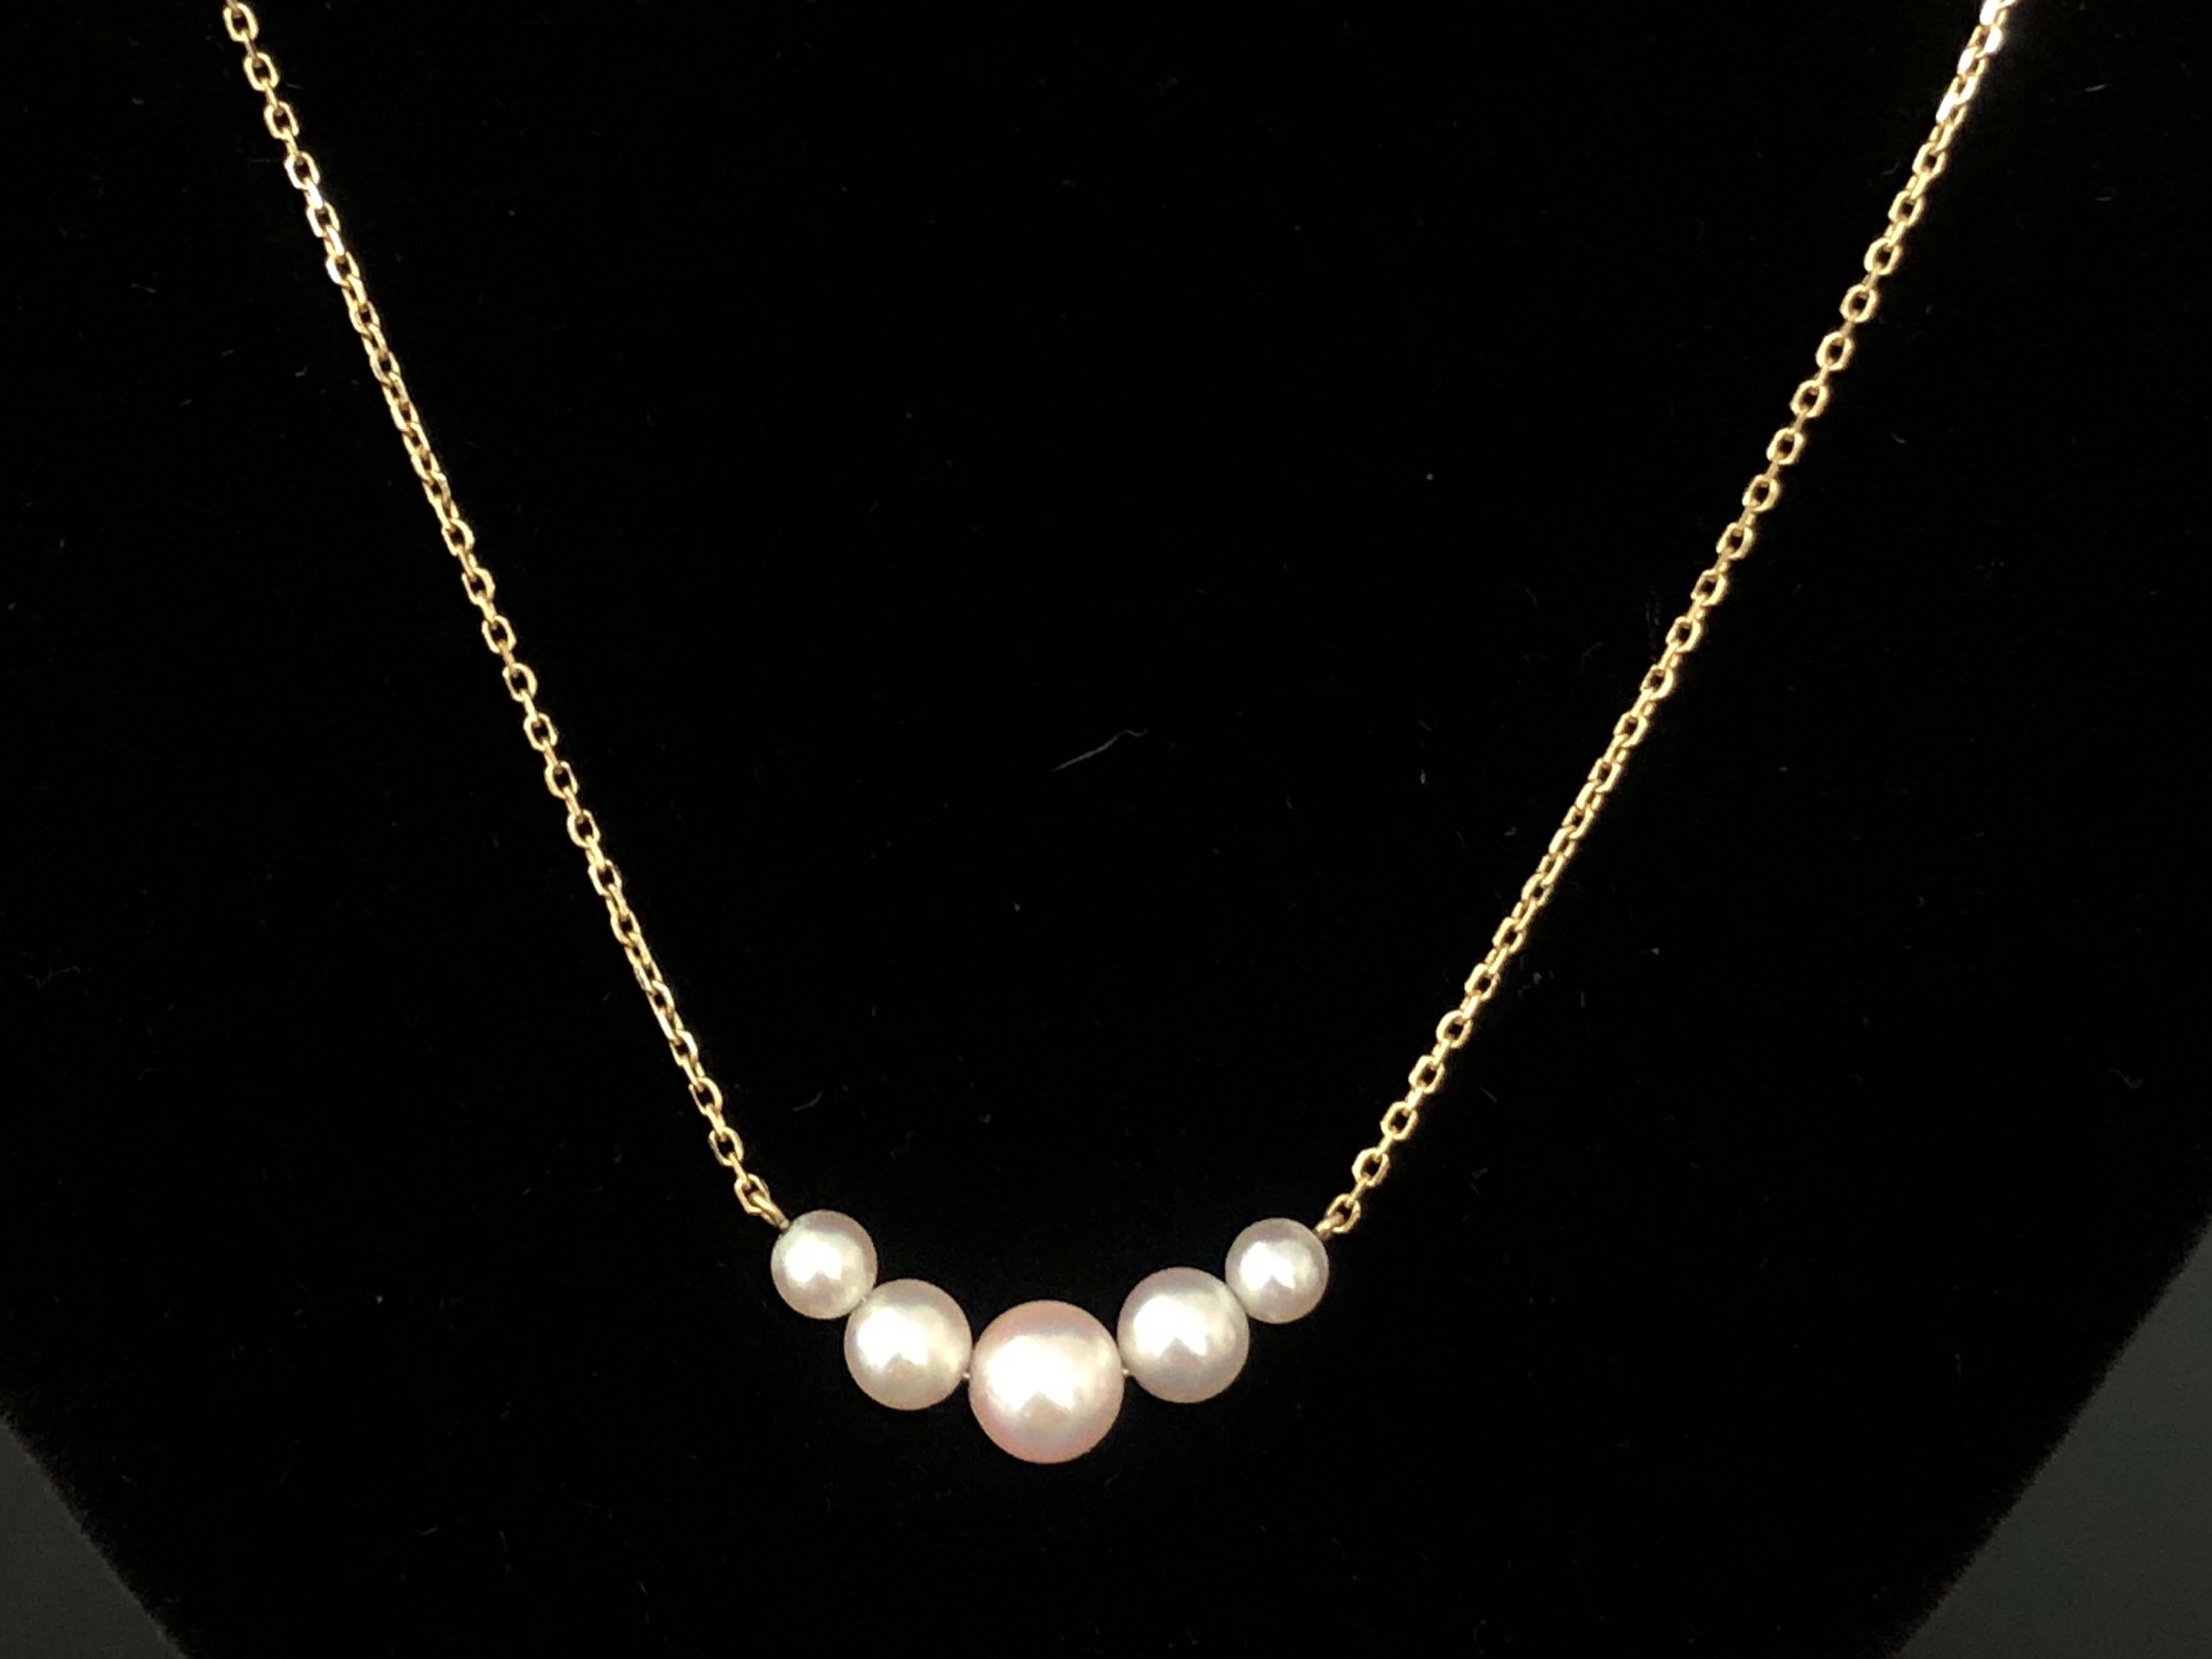 Modern Mikimoto 5 Pearl Necklace in 14k Yellow Gold